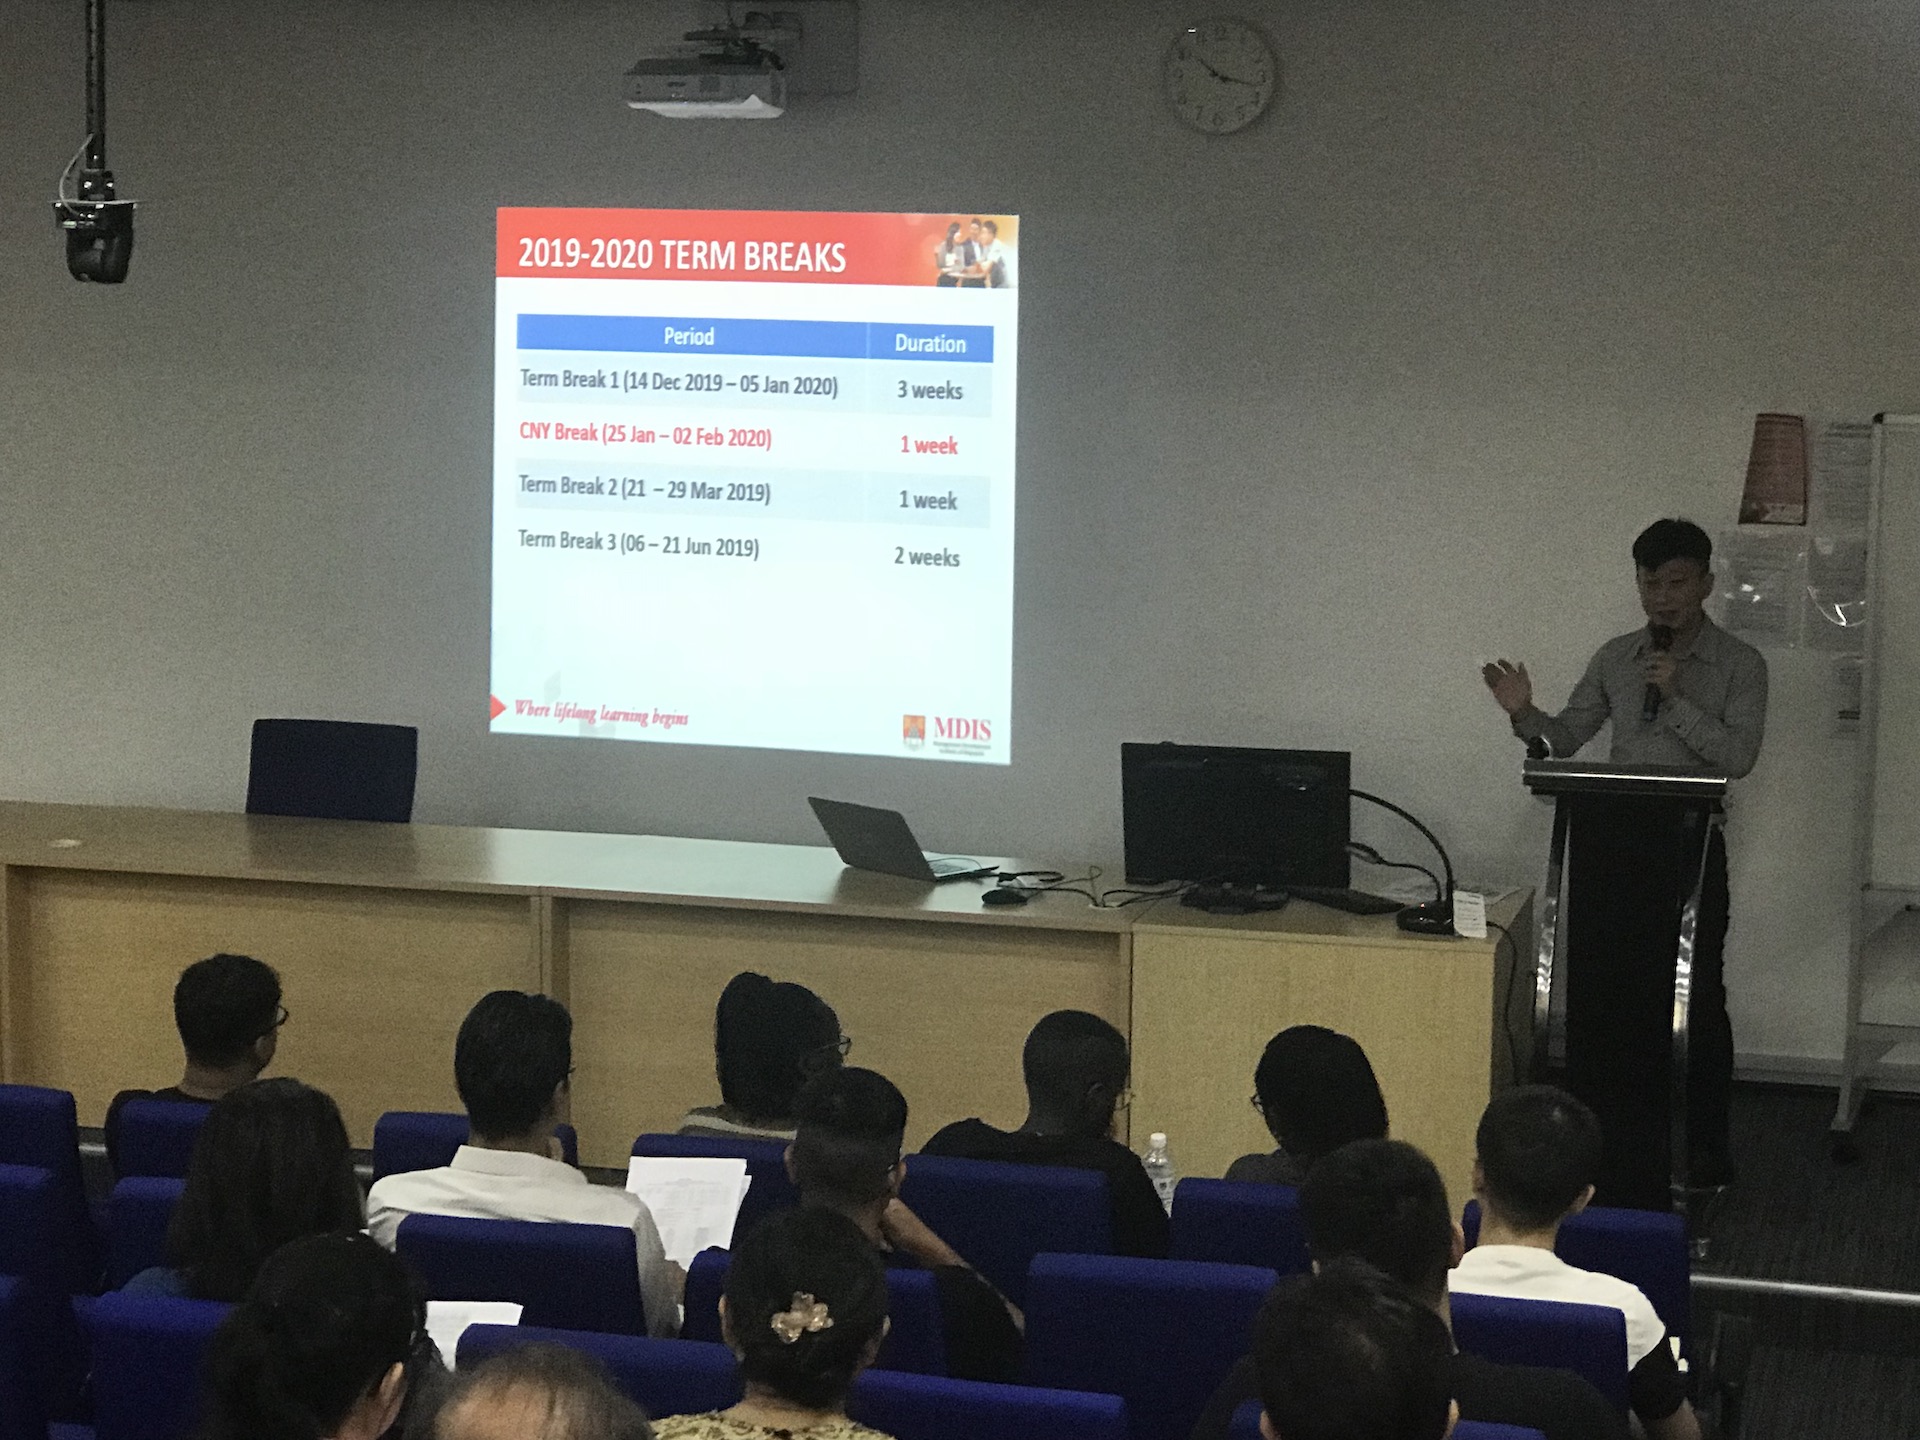 MDIS college lecturer sharing with students about the academic calendar.